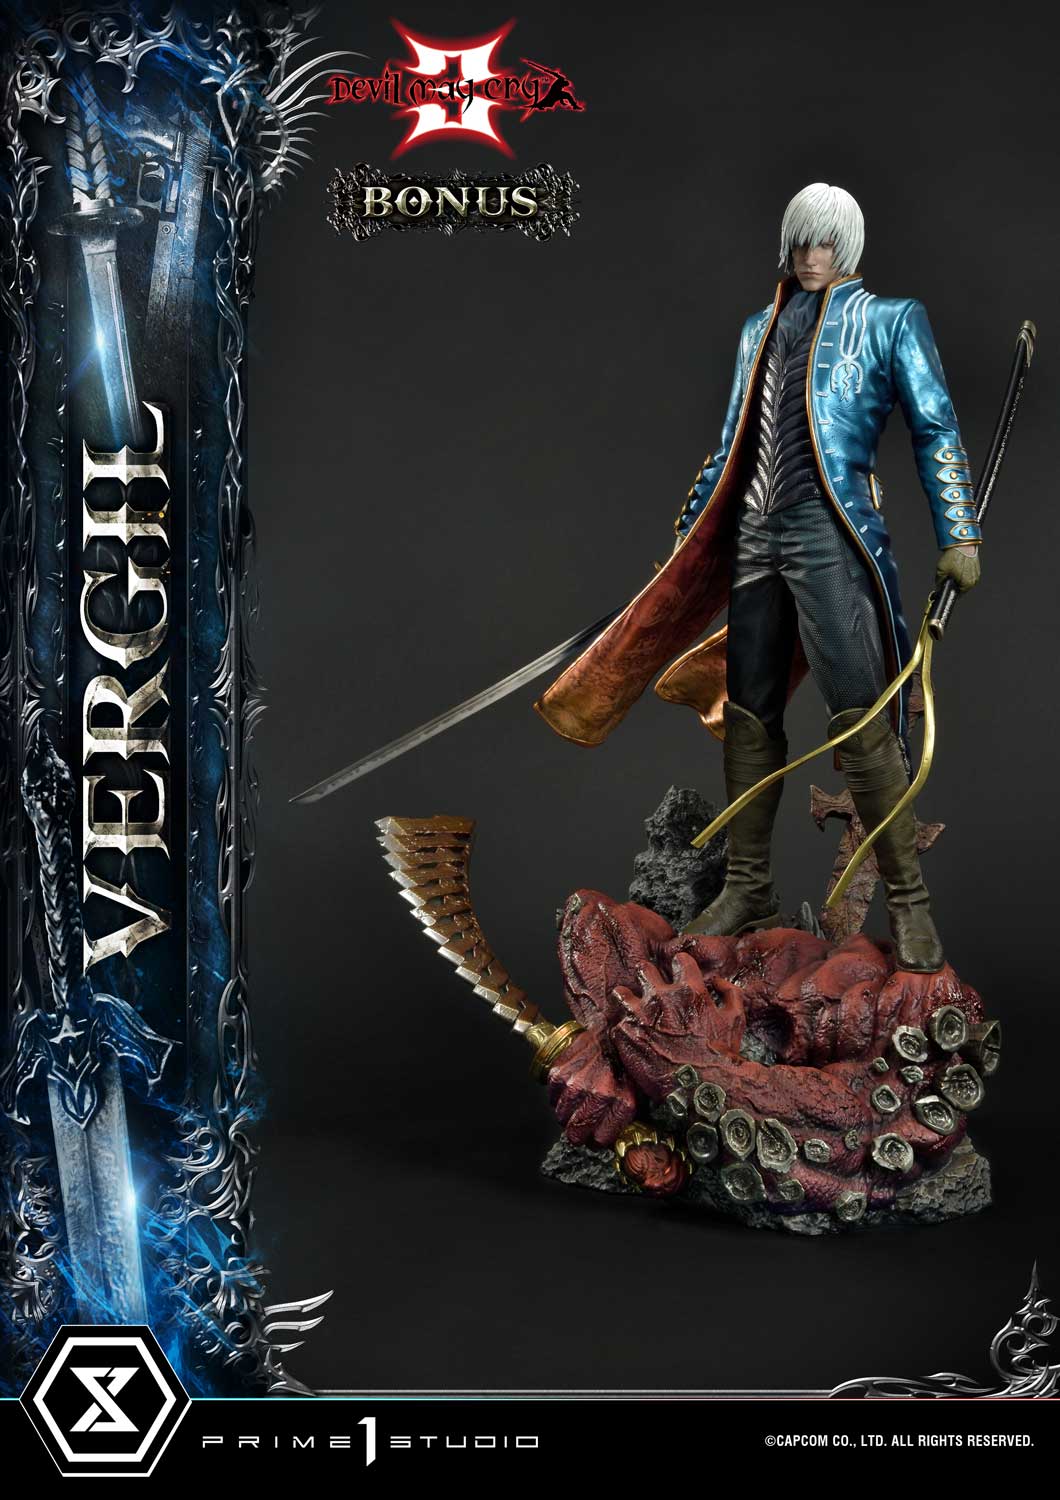 Devil May Cry 3 Dante Silver White Cosplay Wig